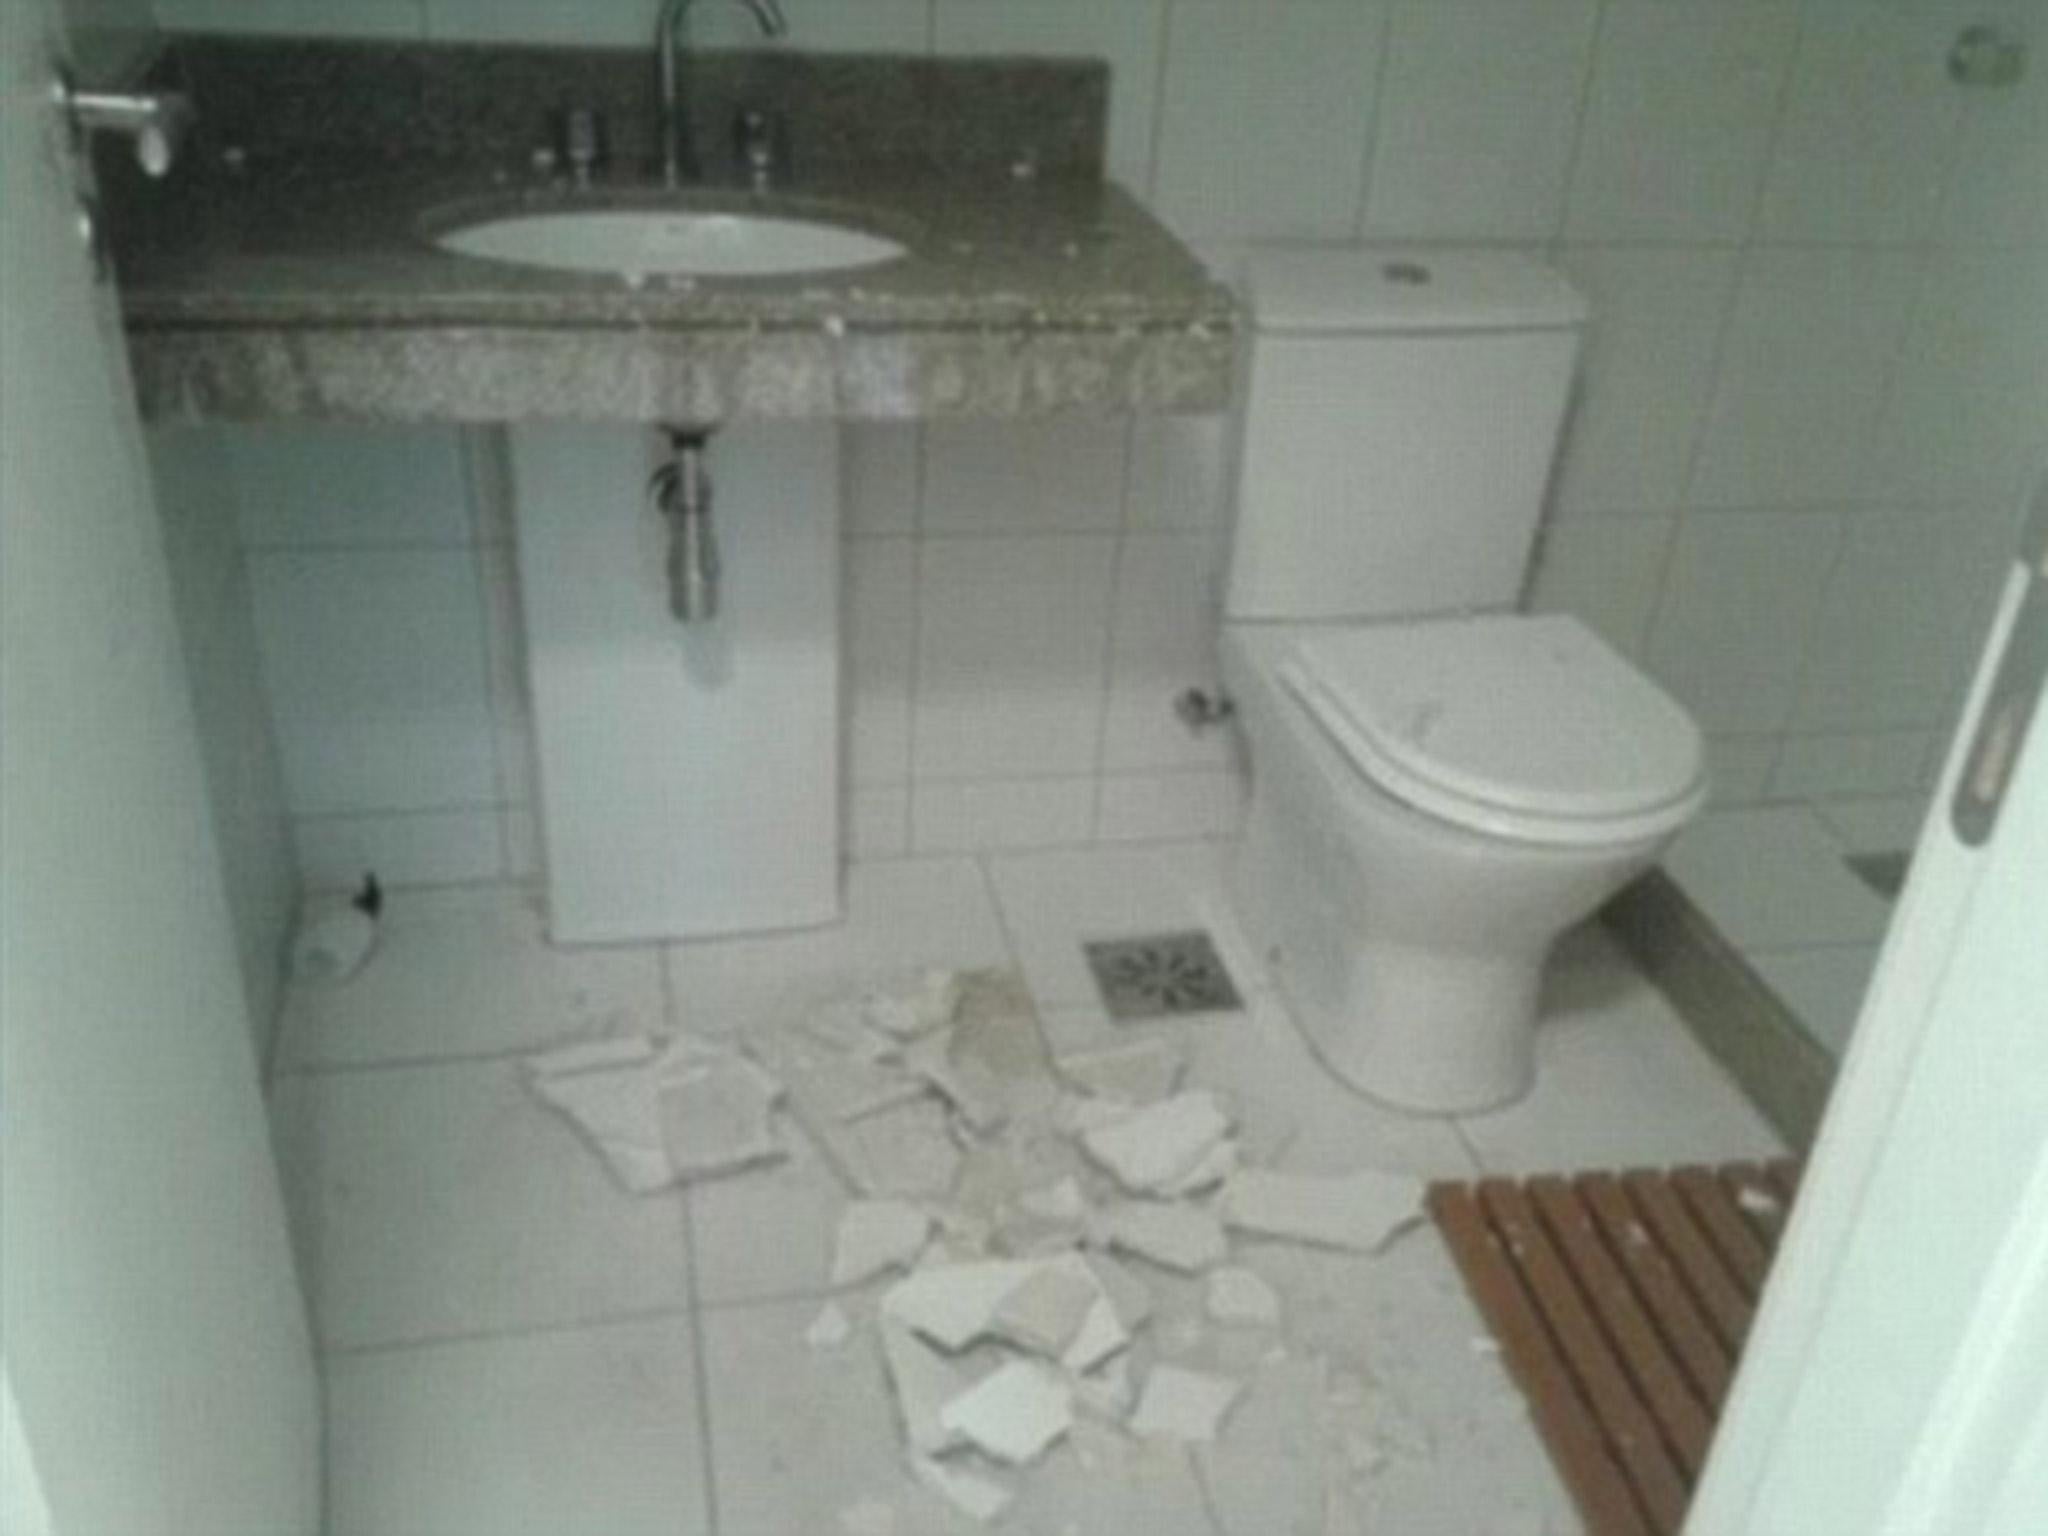 Some rooms had fixtures stolen and bathrooms smashed